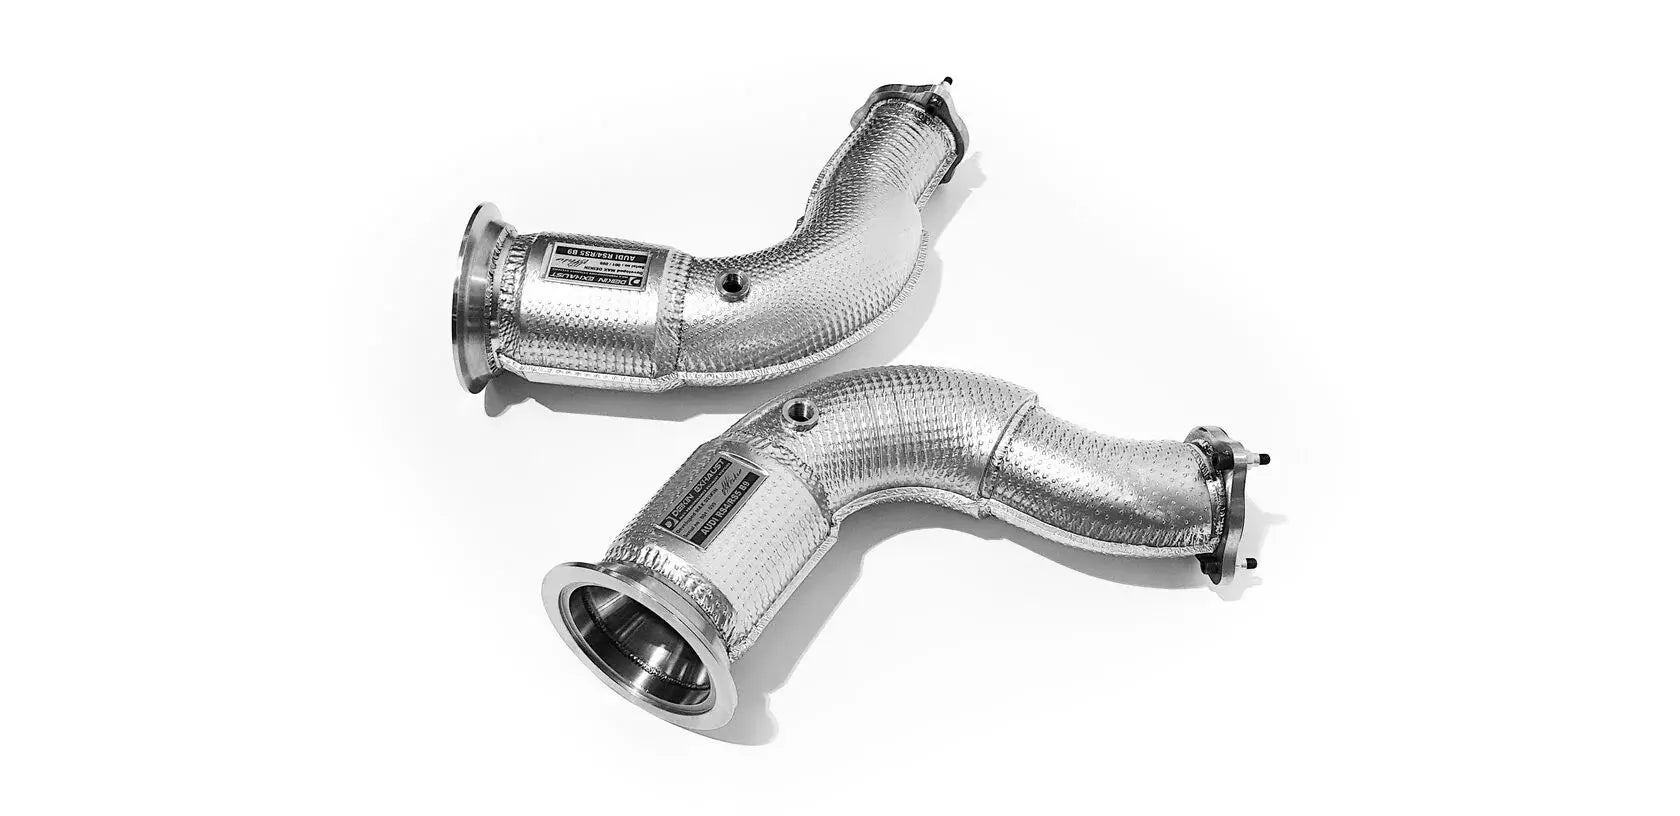 DEIKIN 10-AUDI.RS4.B9-DPT Downpipe for AUDI RS4 (B9) with thermal insulation HeatShield Photo-2 